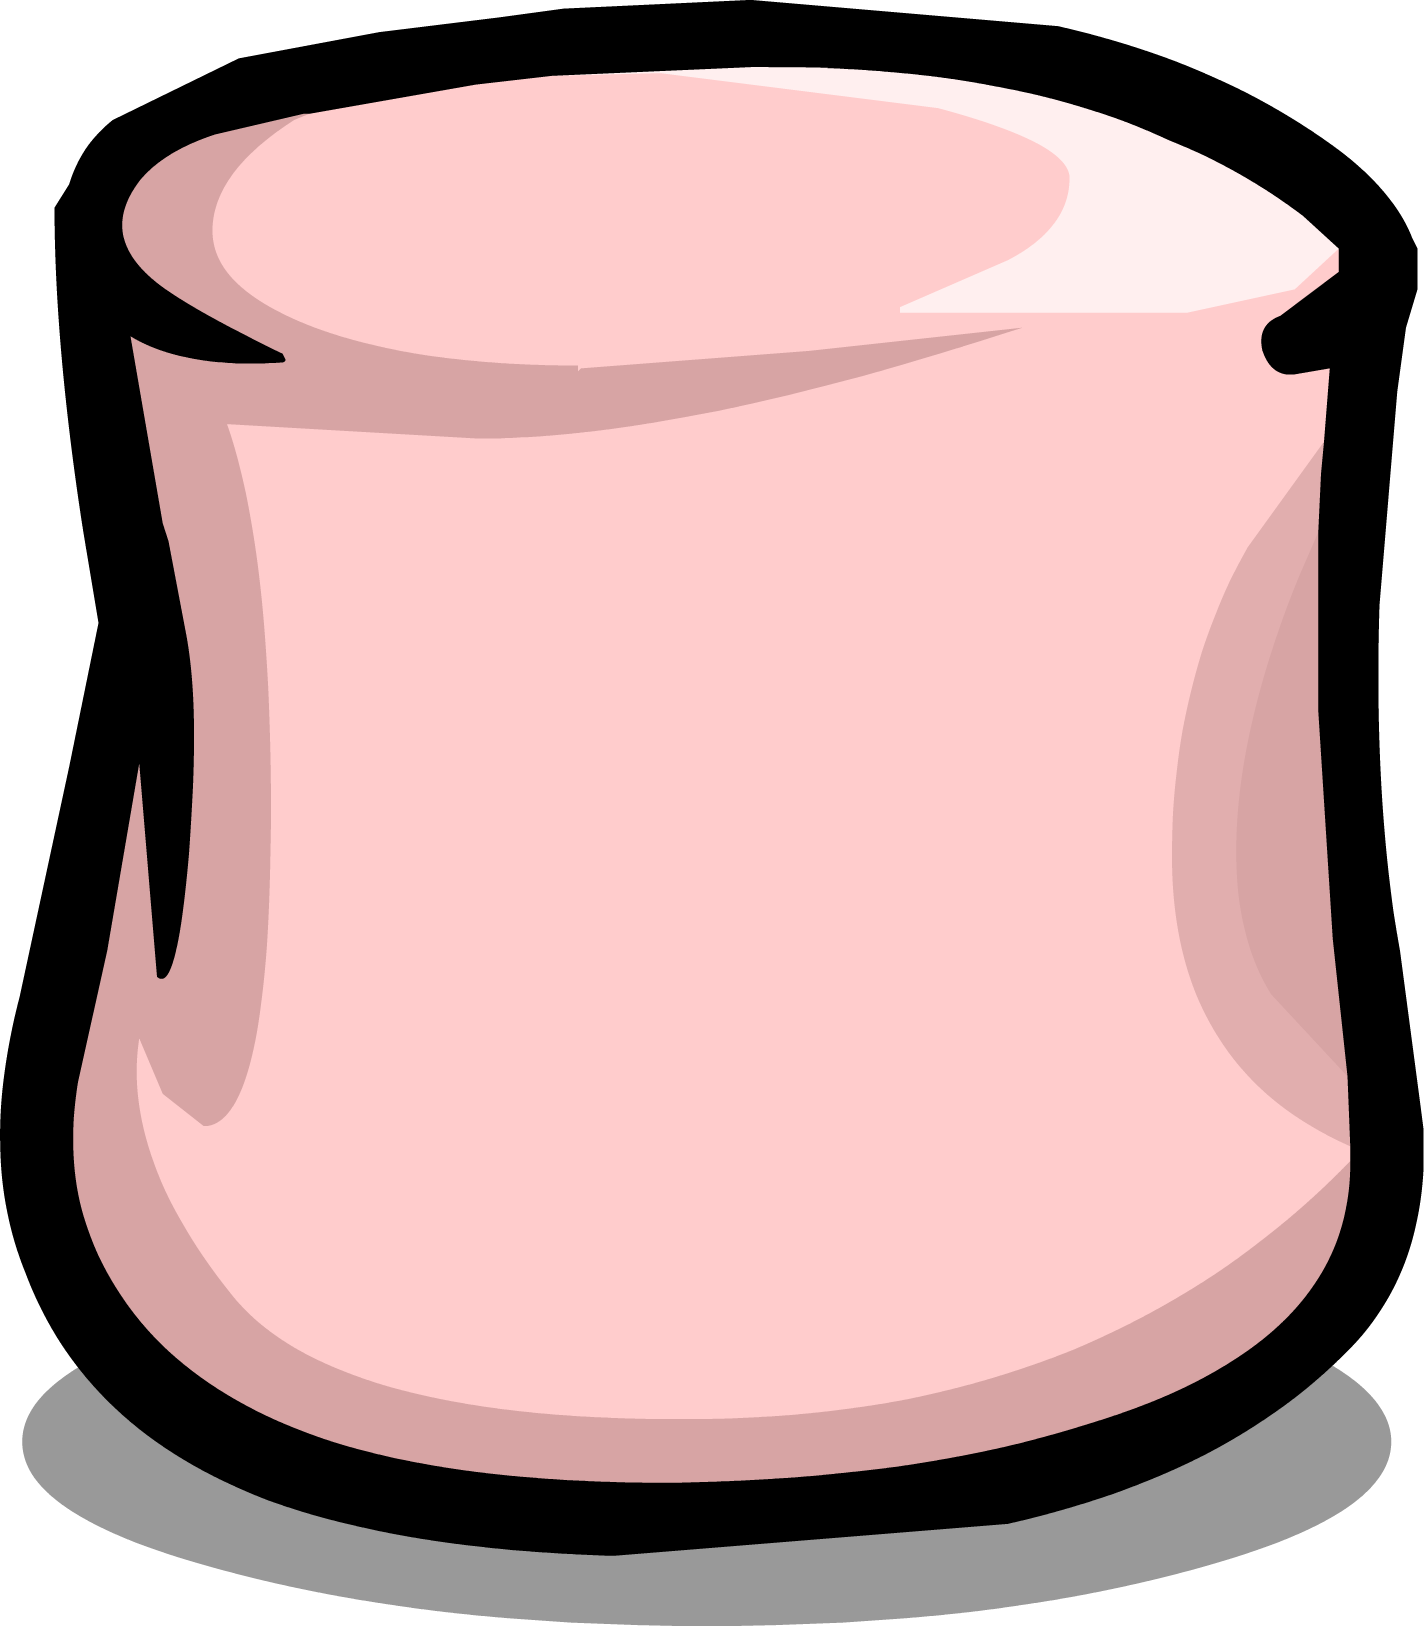 A Pink Cylinder With Black Background